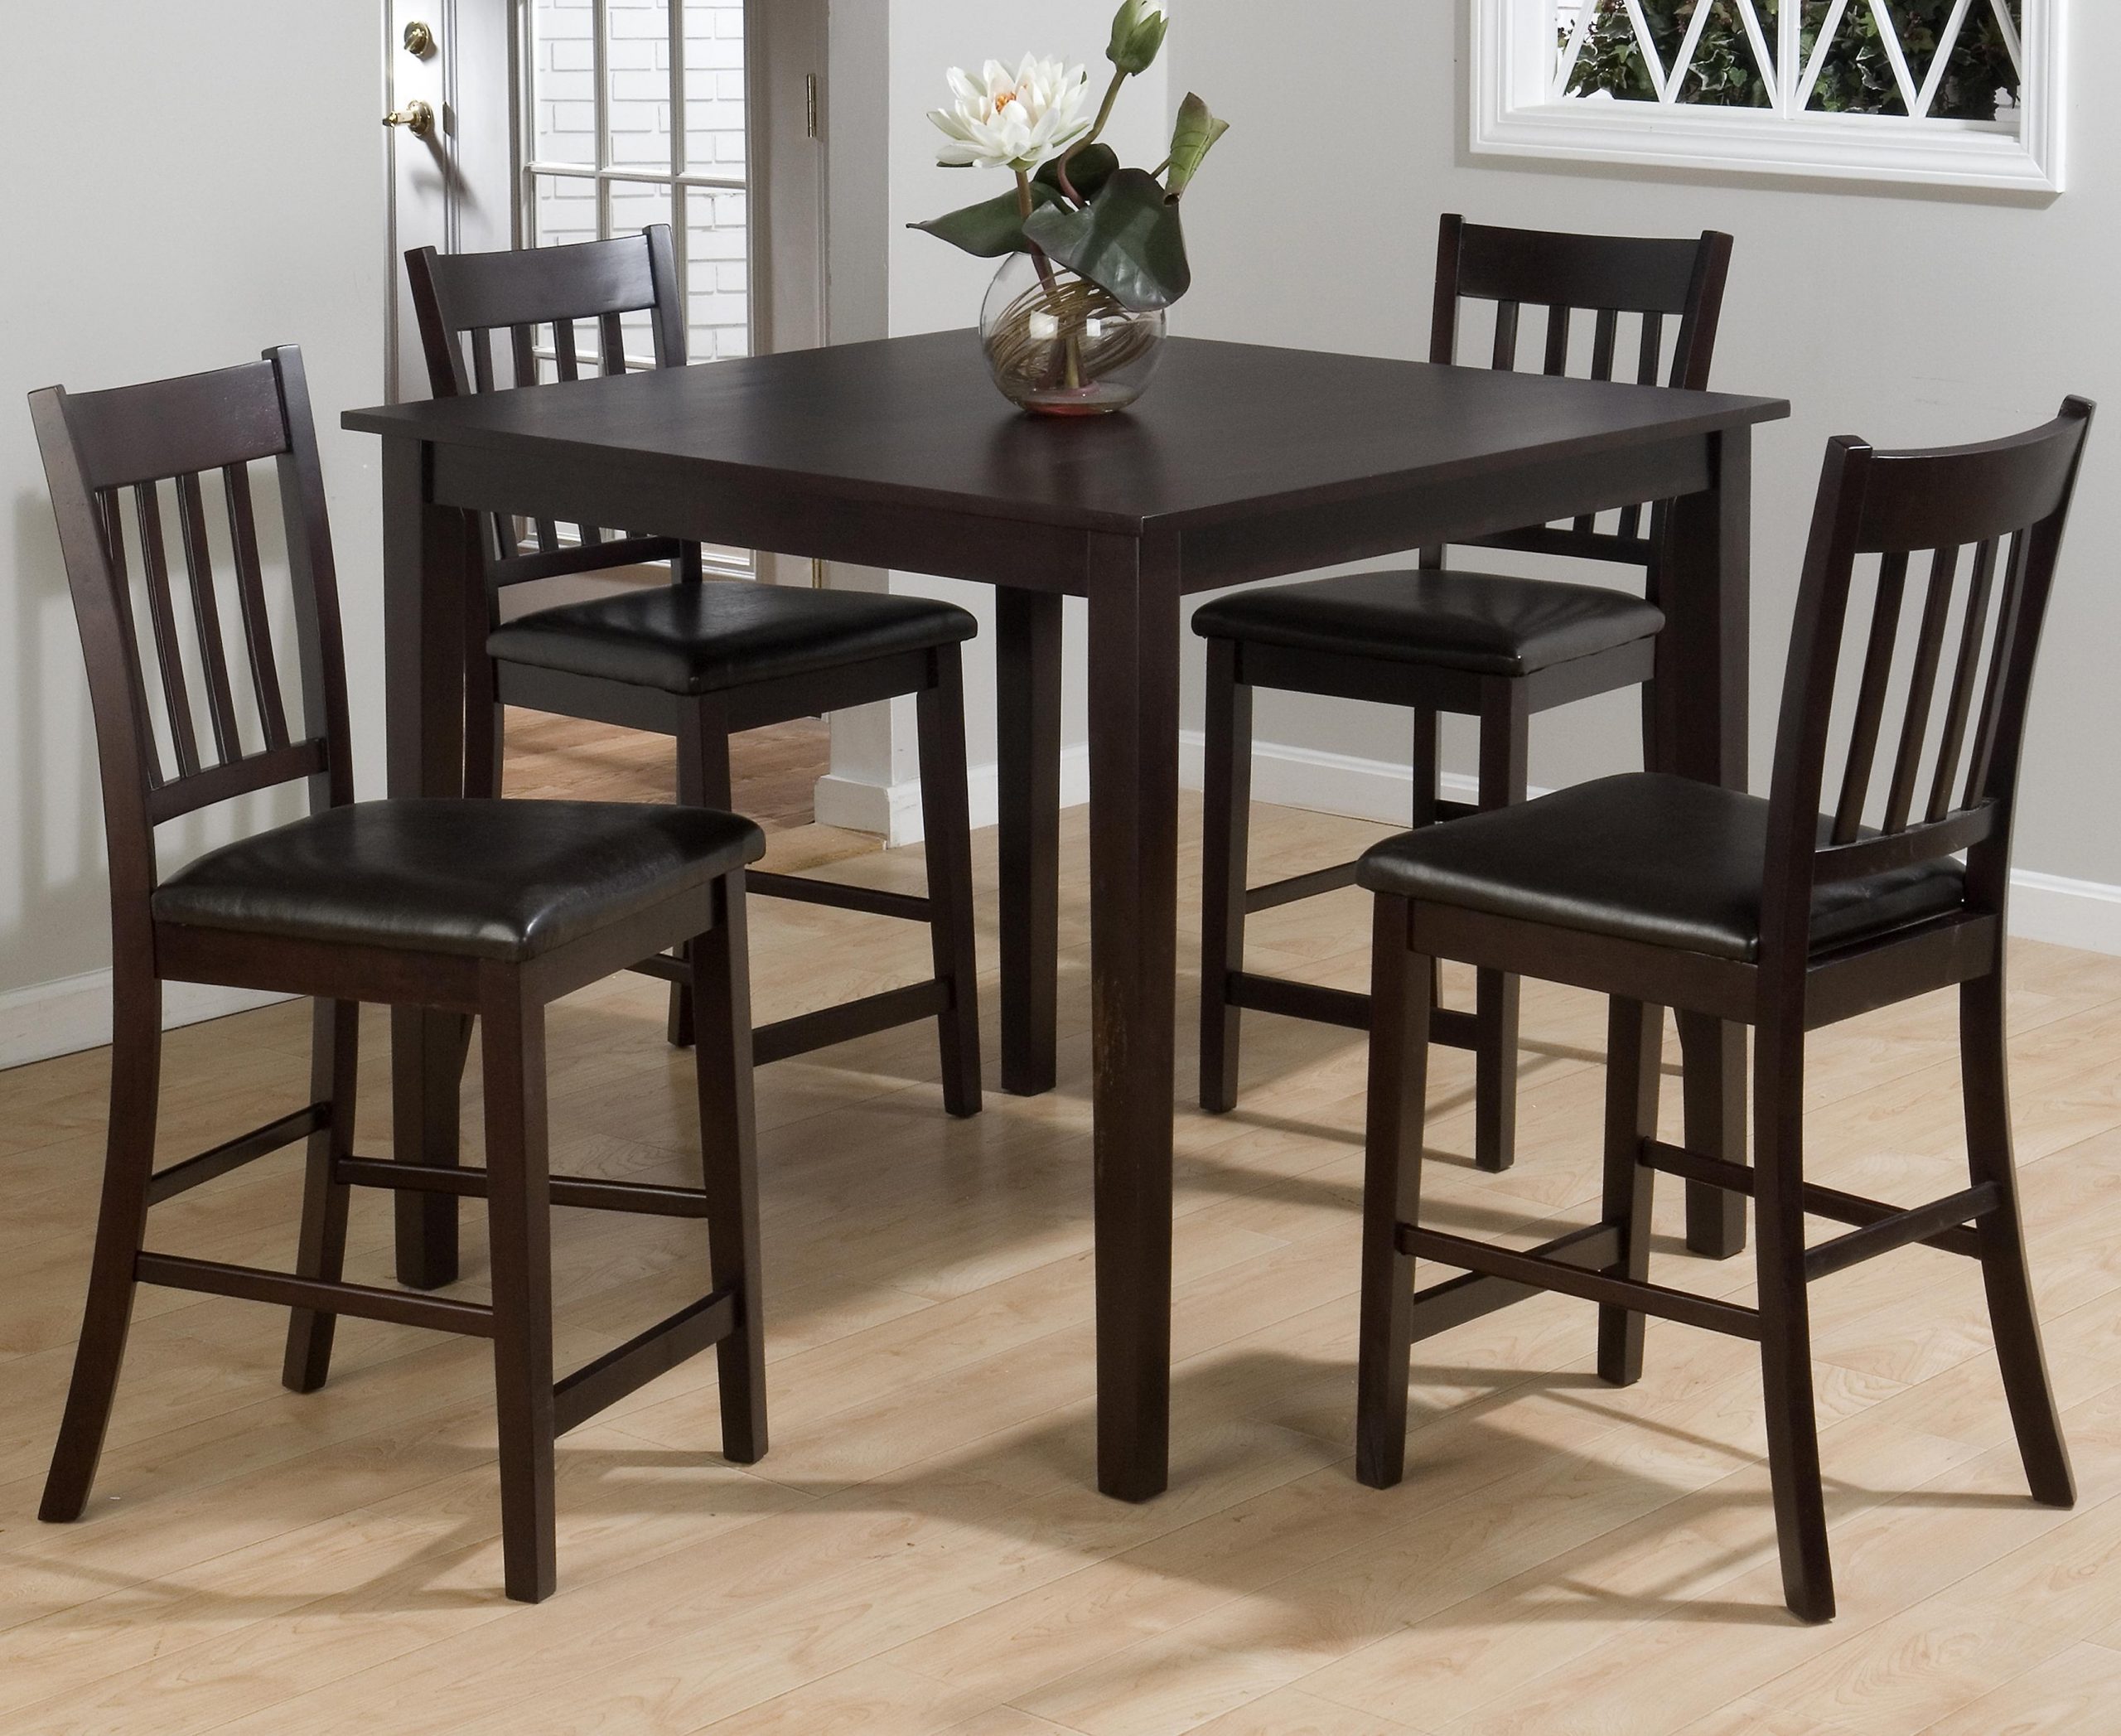 Big Lots Kitchen Tables Kitchen Tables Sets For Size 3428 X 2805 Scaled 